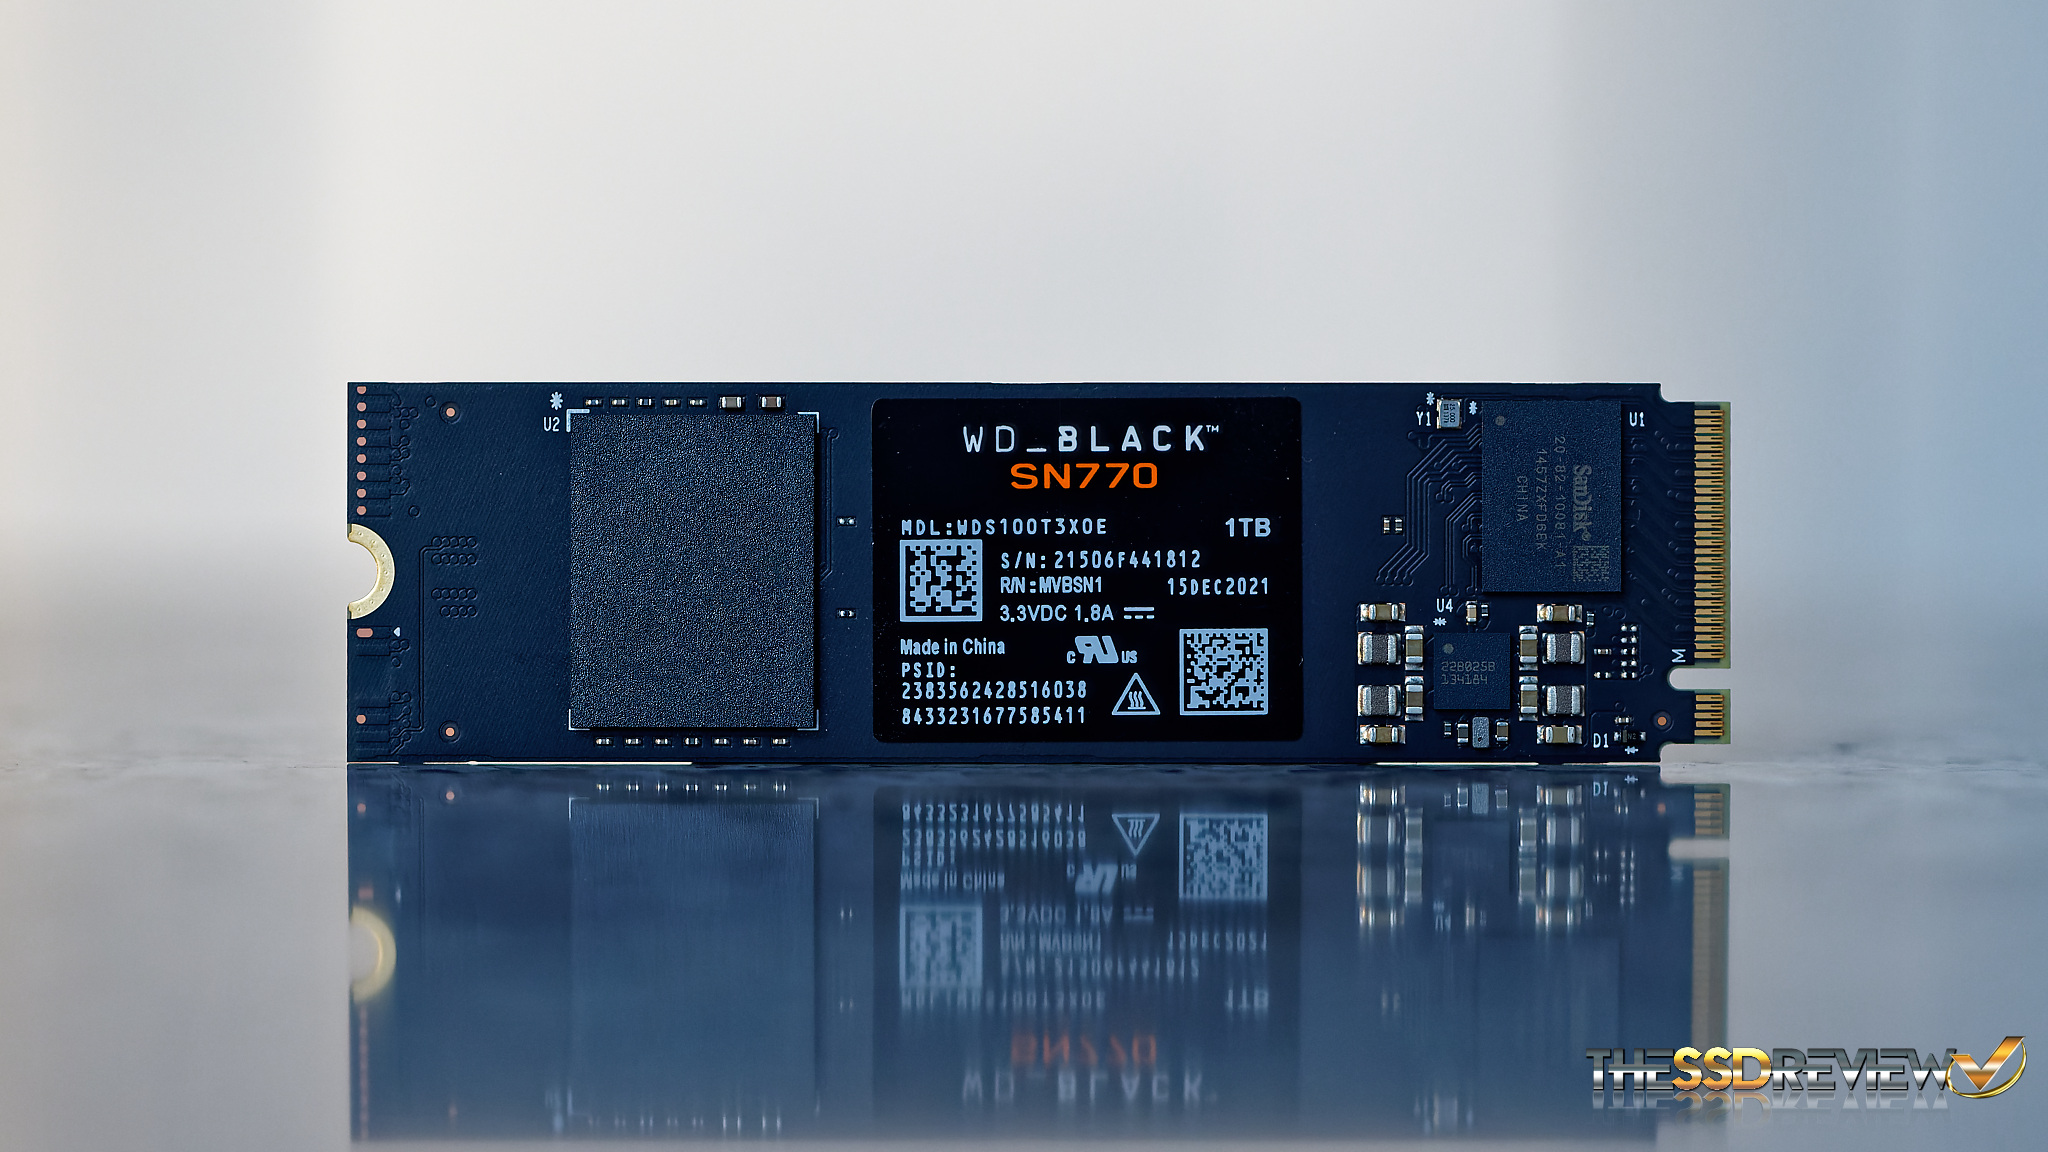 WD Black SN770 SSD is a budget Gen 4 SSD with respectable speeds